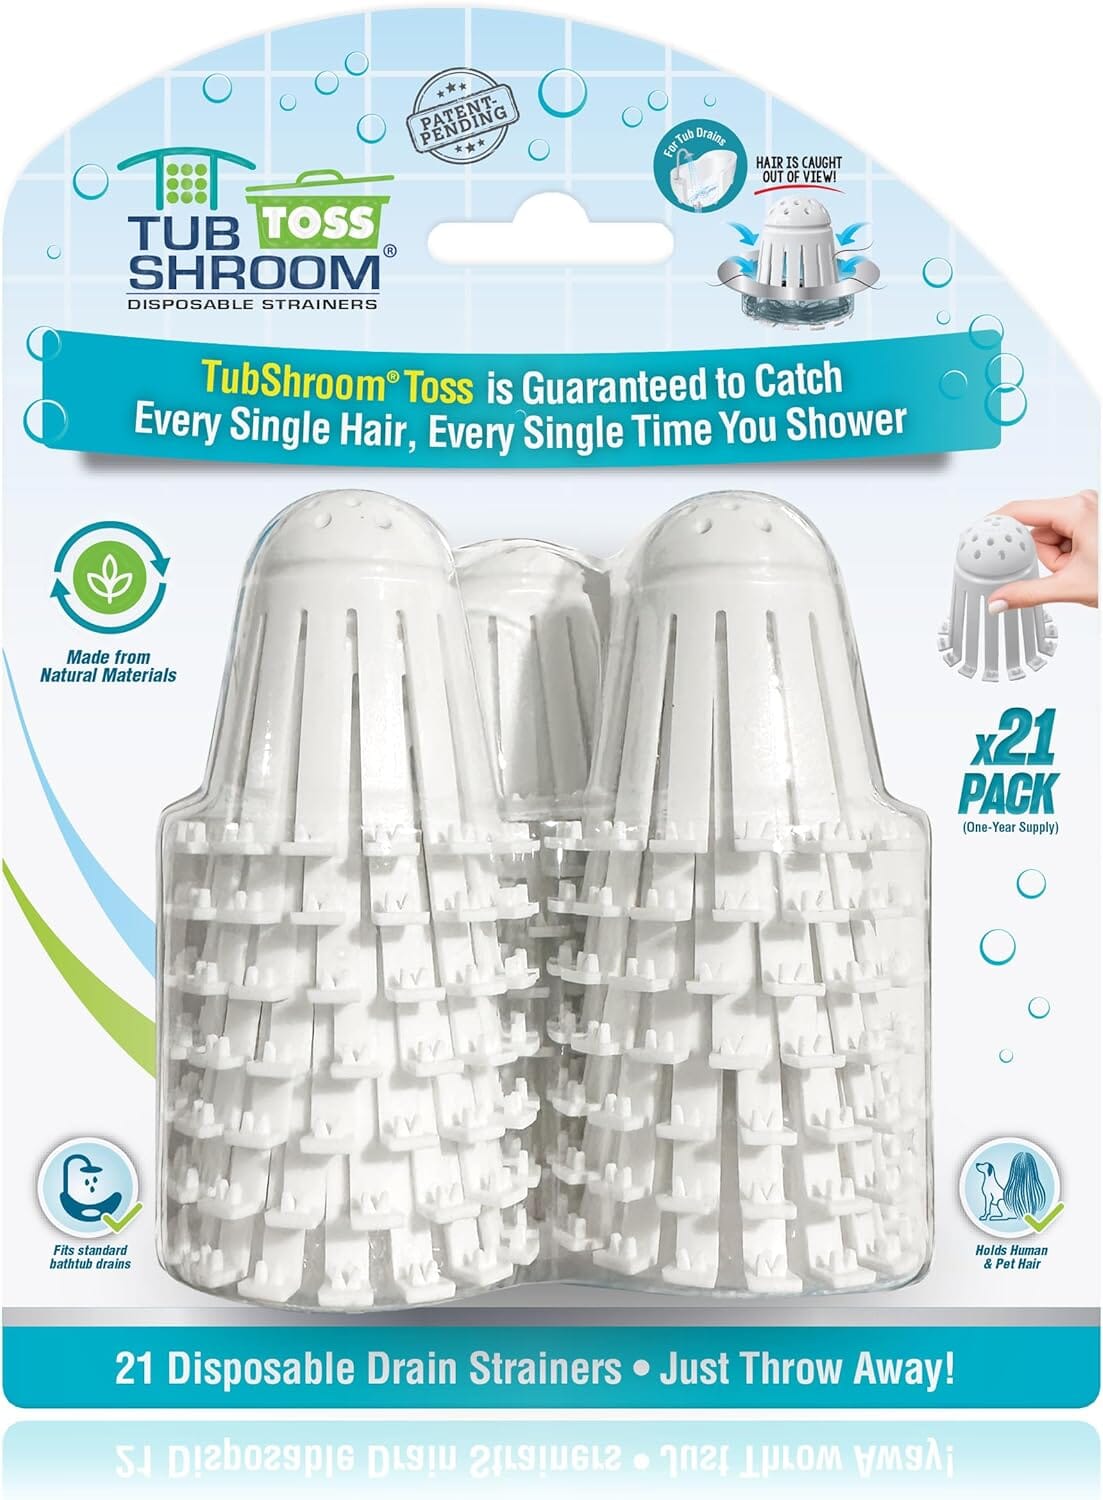 TubShroom Toss 21pk Disposable Bath Tub Drain Strainers - Hair Catcher Snare for Shower Bathtub to Prevent Clogged Drains Drain Protector TubShroom.com White 